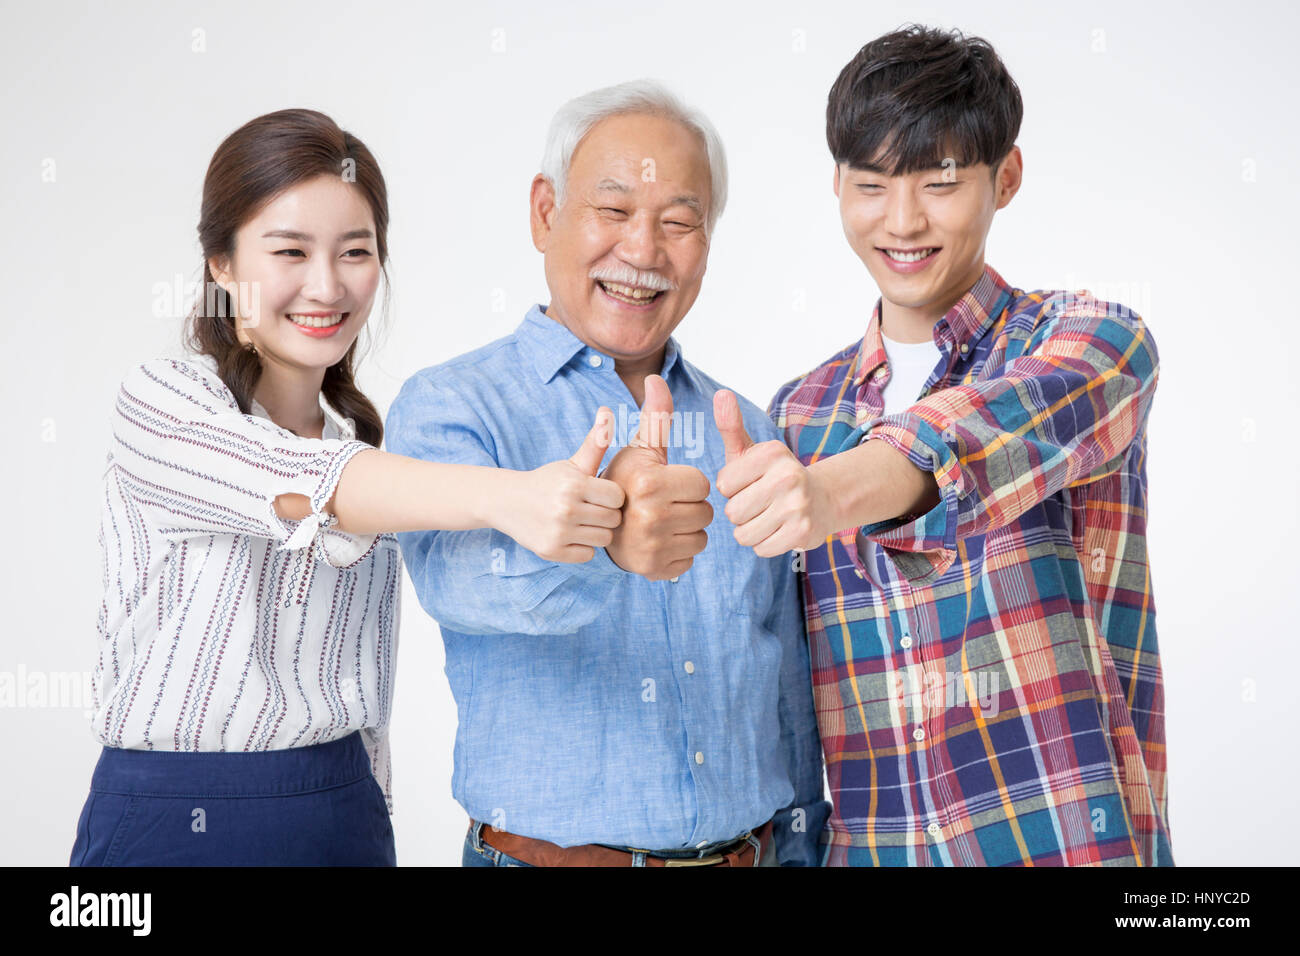 Smiling people young and old showing thumbs-up Stock Photo